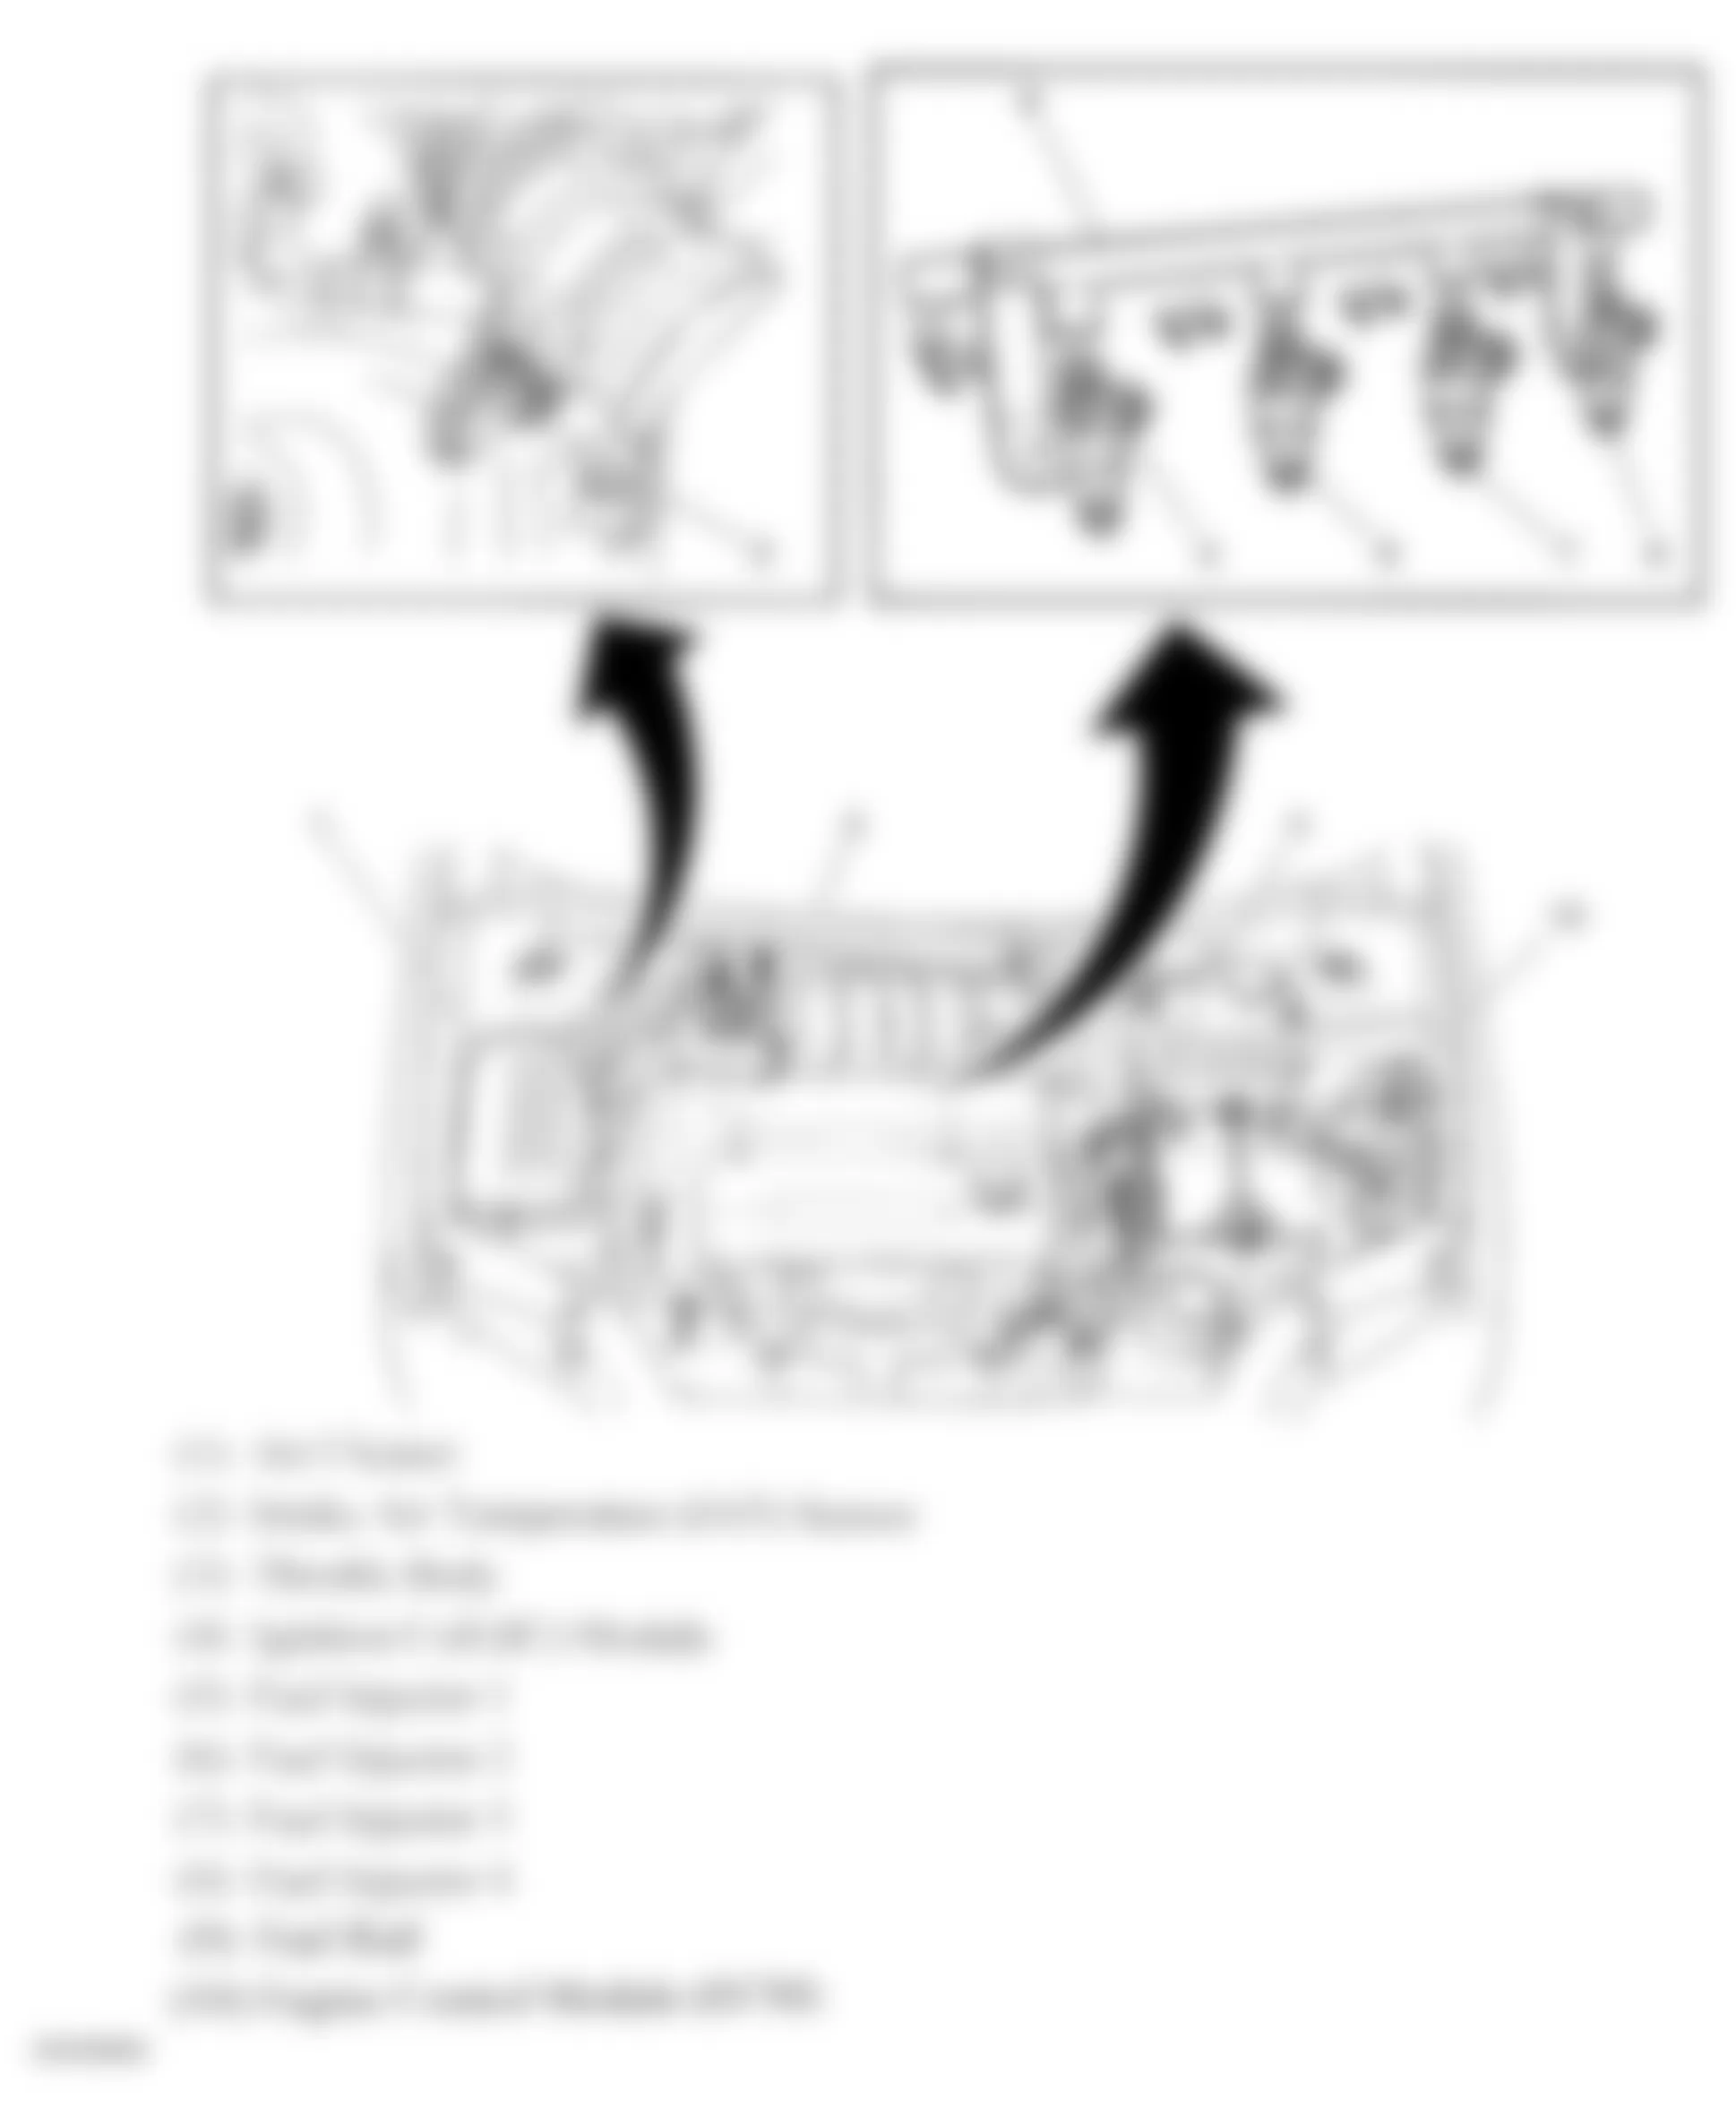 Chevrolet Aveo LT 2005 - Component Locations -  Engine Compartment